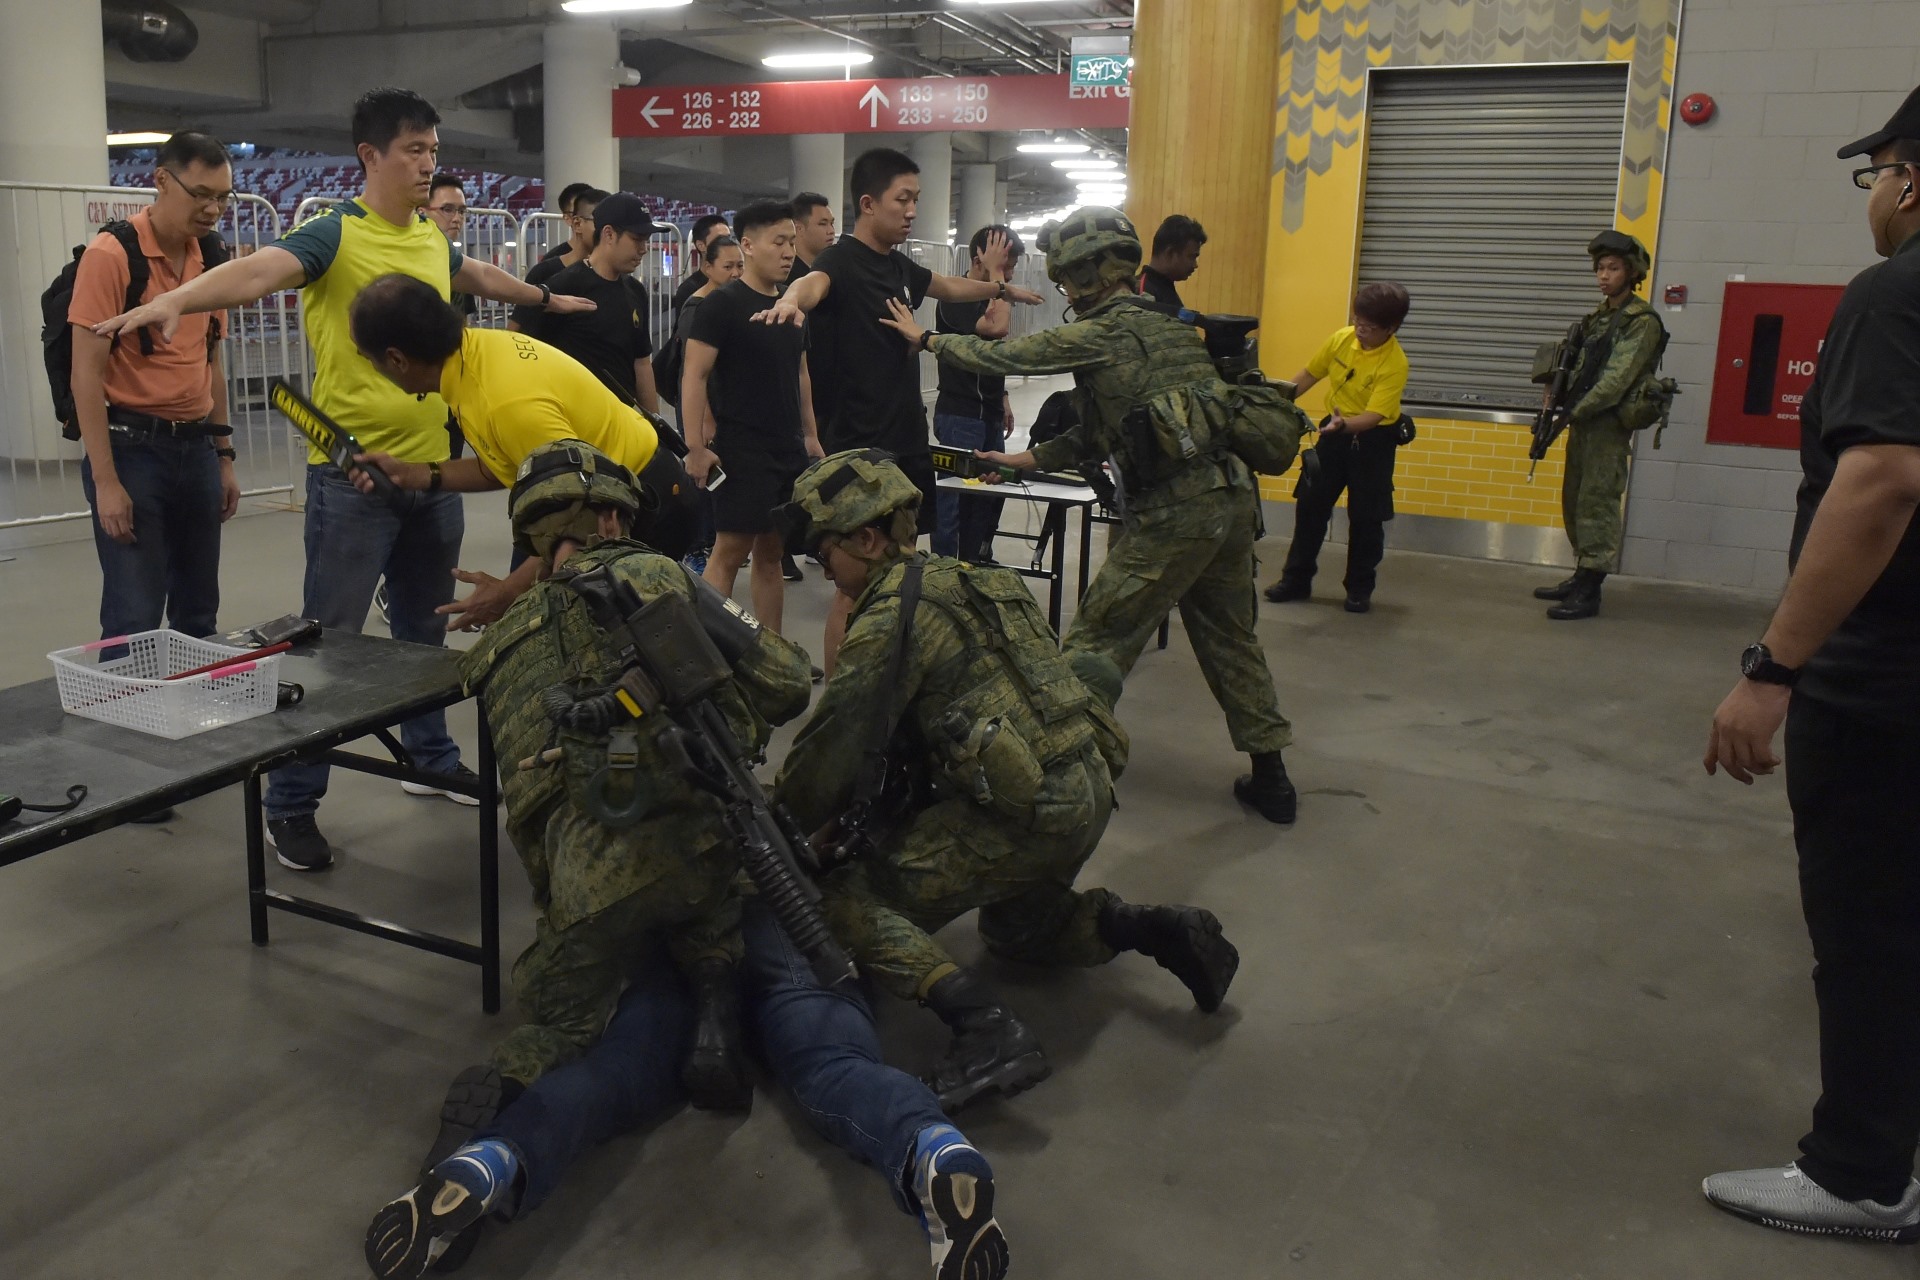 Soldiers from the 3rd Battalion, Singapore Infantry Regiment (3 SIR) and security personnel from Sports Hub at the personnel access control point, apprehending a member of the public who did not comply with the instructions.